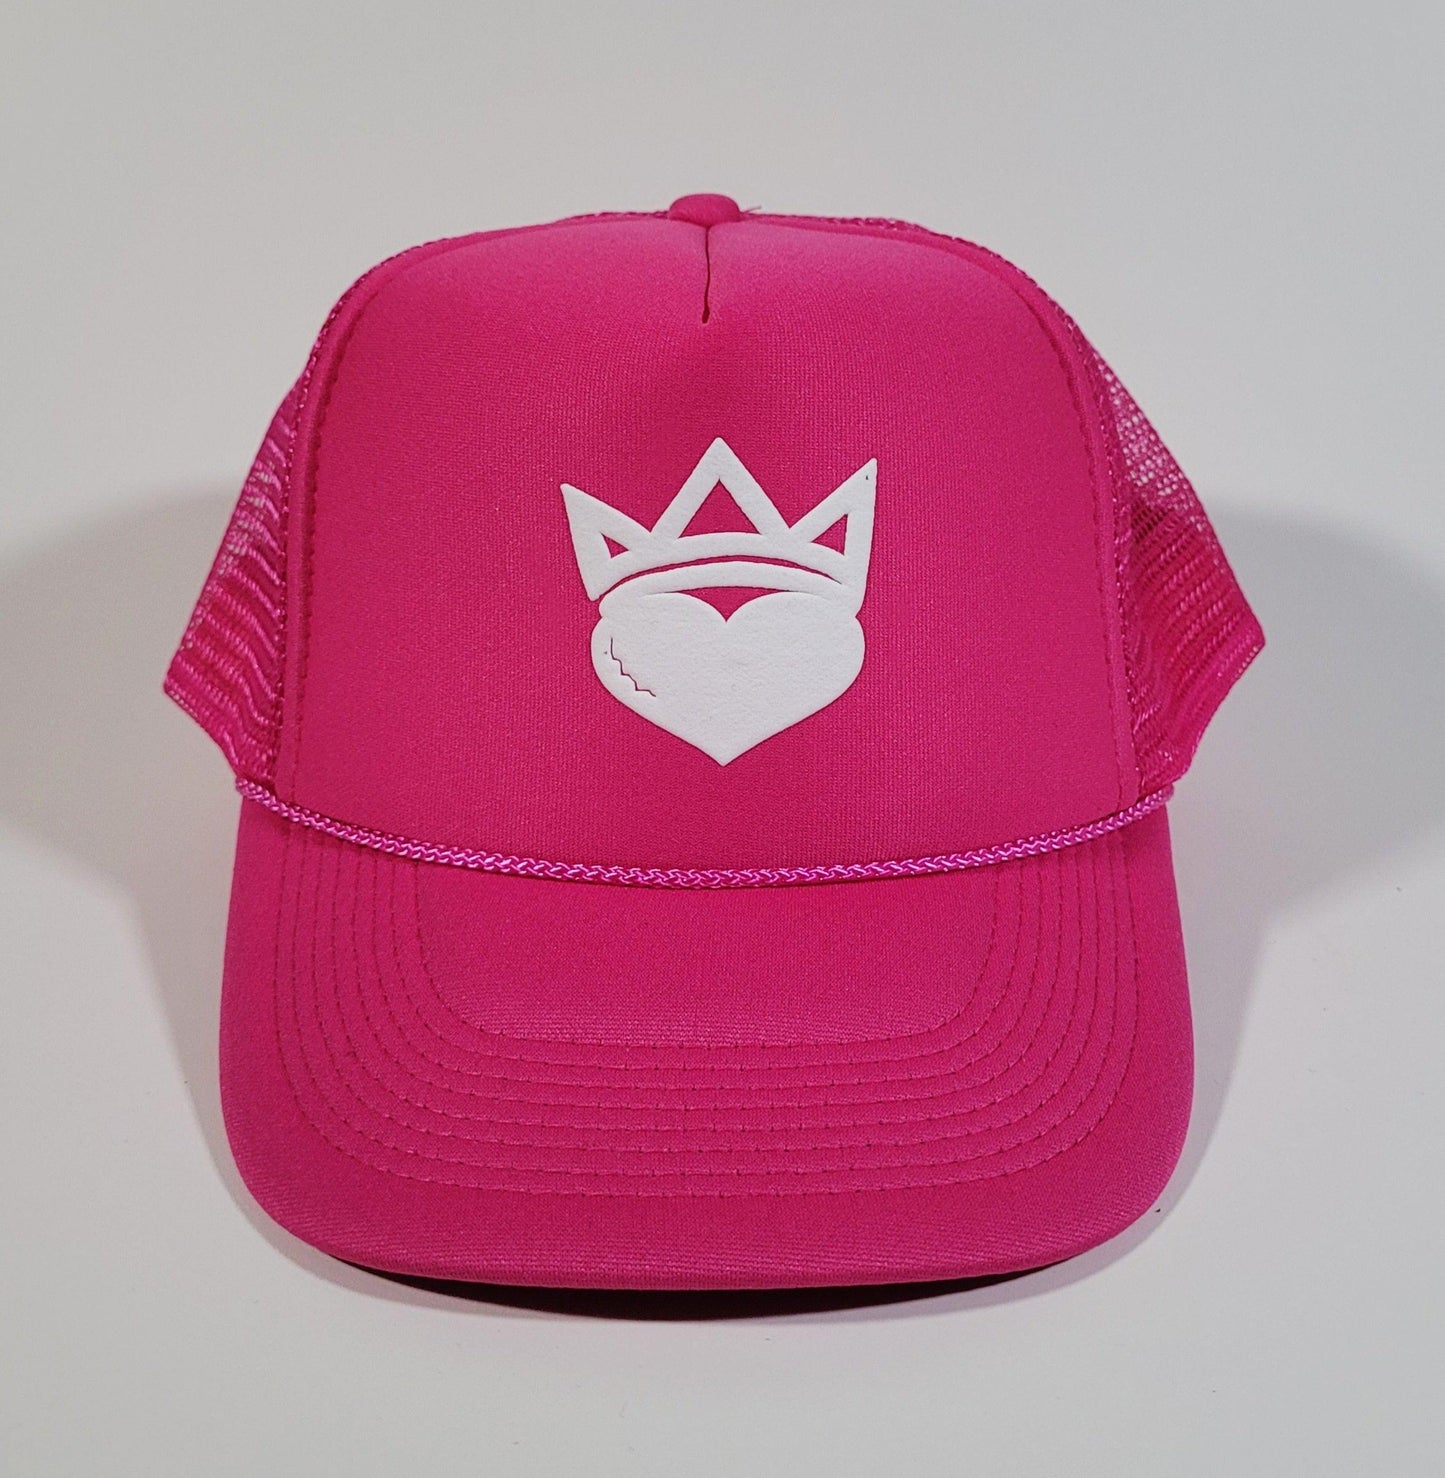 Dark Pink & White "King/Queen Of Hearts" Trucker Hat - Official Crown Store